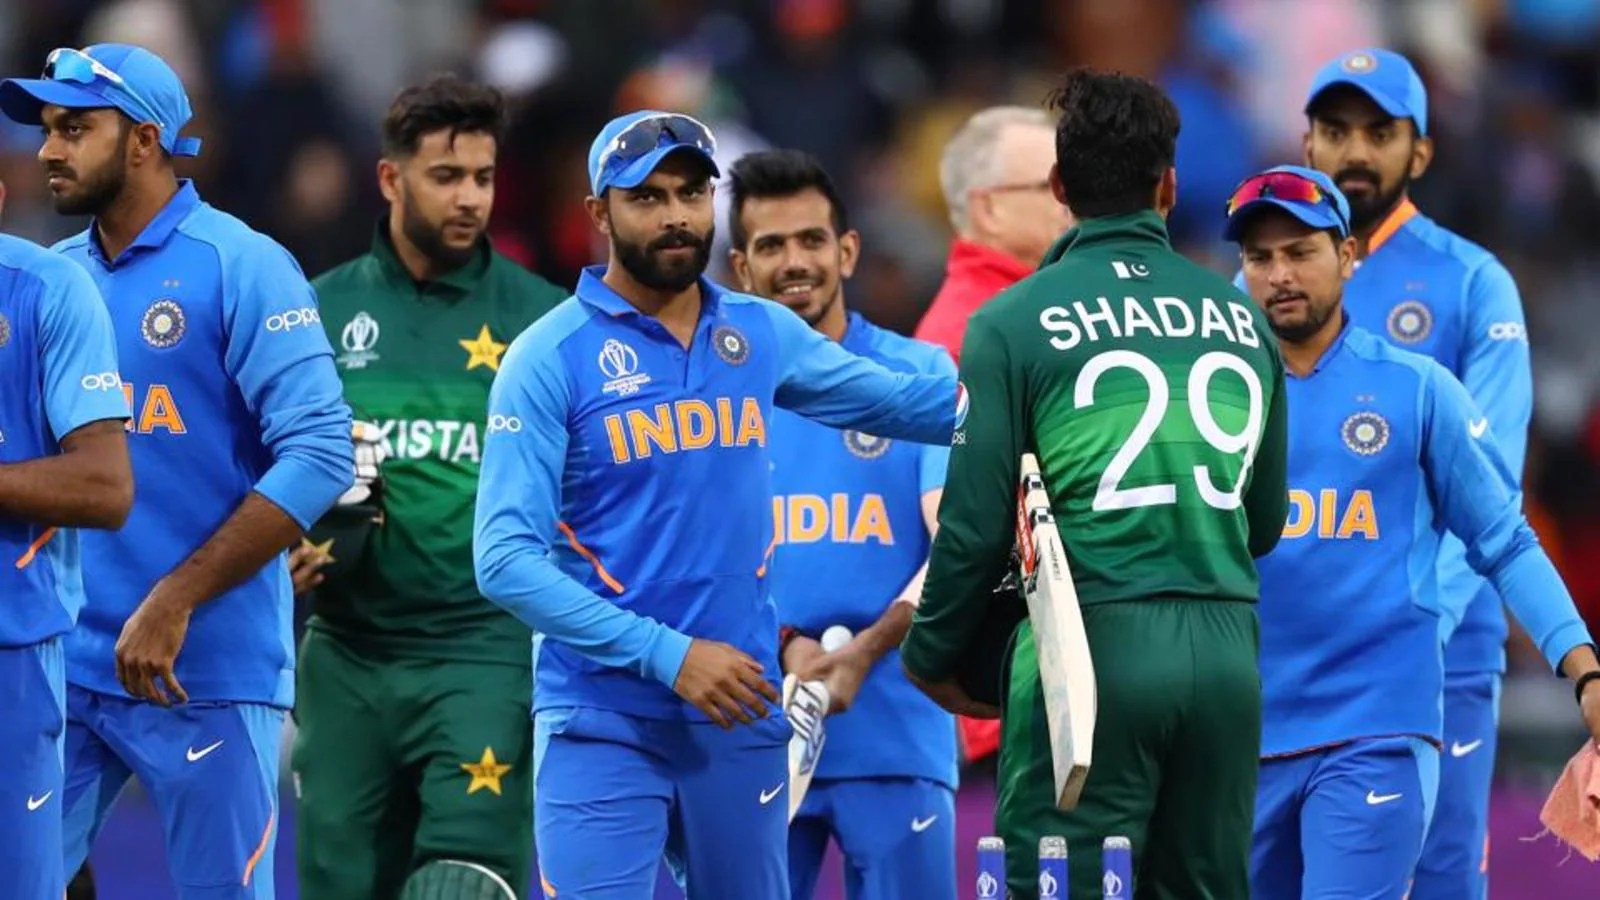 Asia Cup 2022 LIVE: All you want to know about Asia Cup T20 Full Schedule, Format, Squads, & LIVE Streaming Details – Follow Asia Cup 2022 Live Updates 